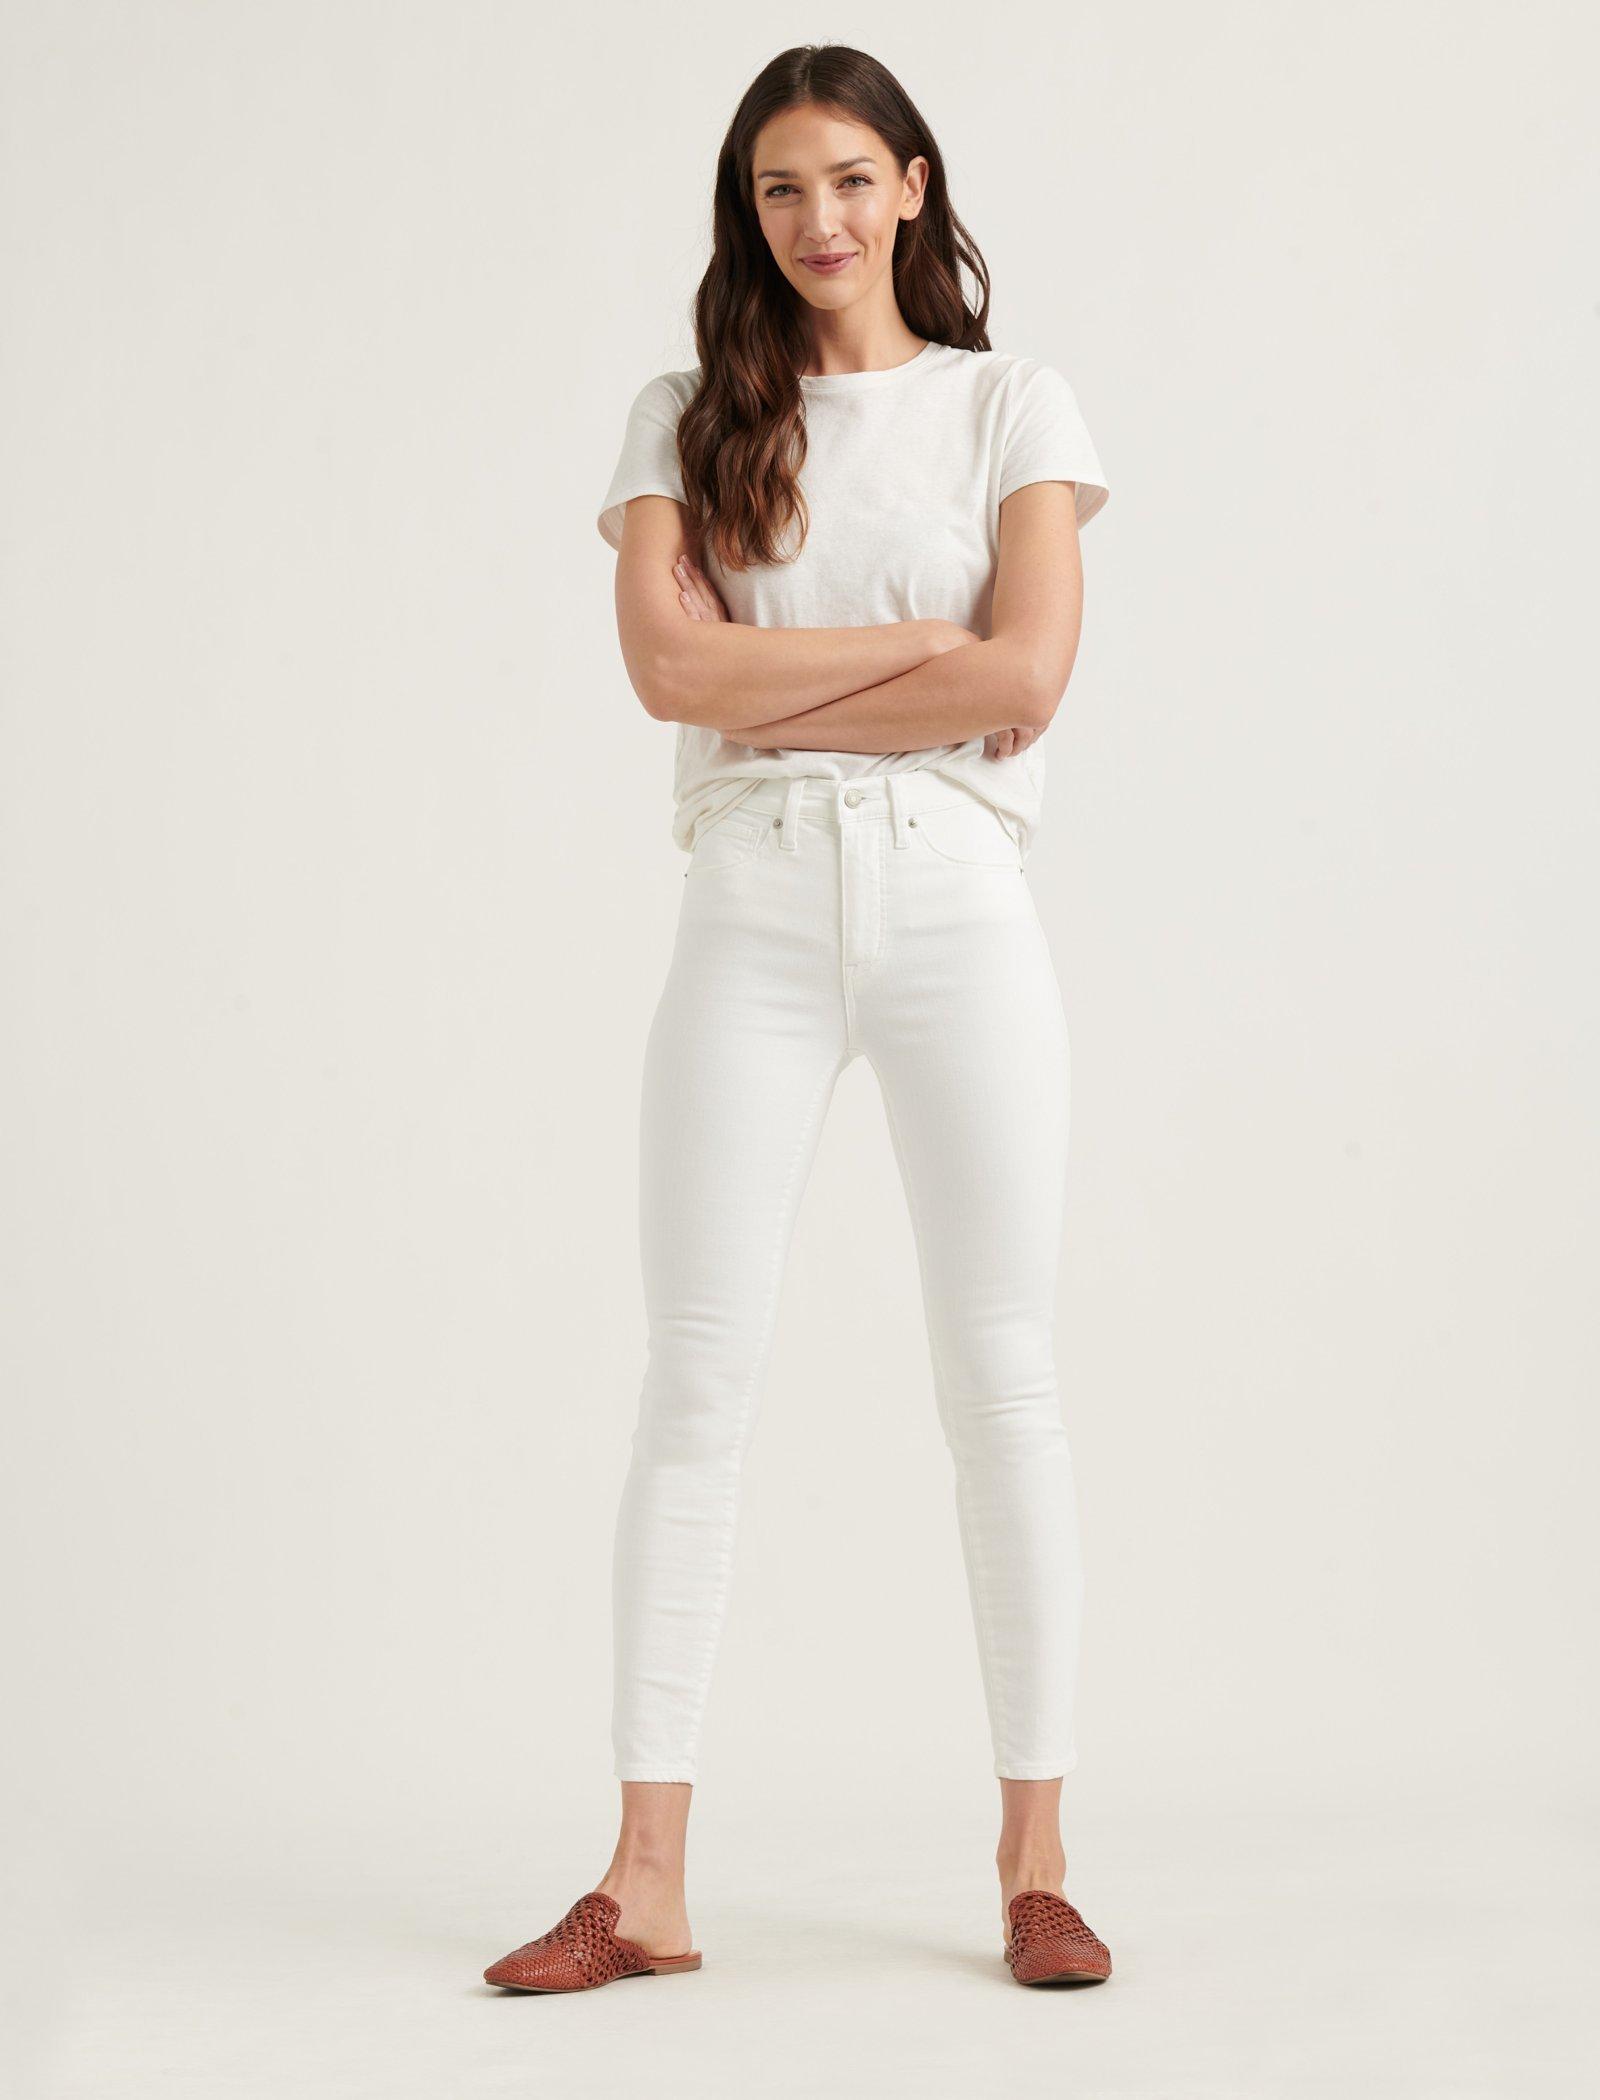 lucky white jeans